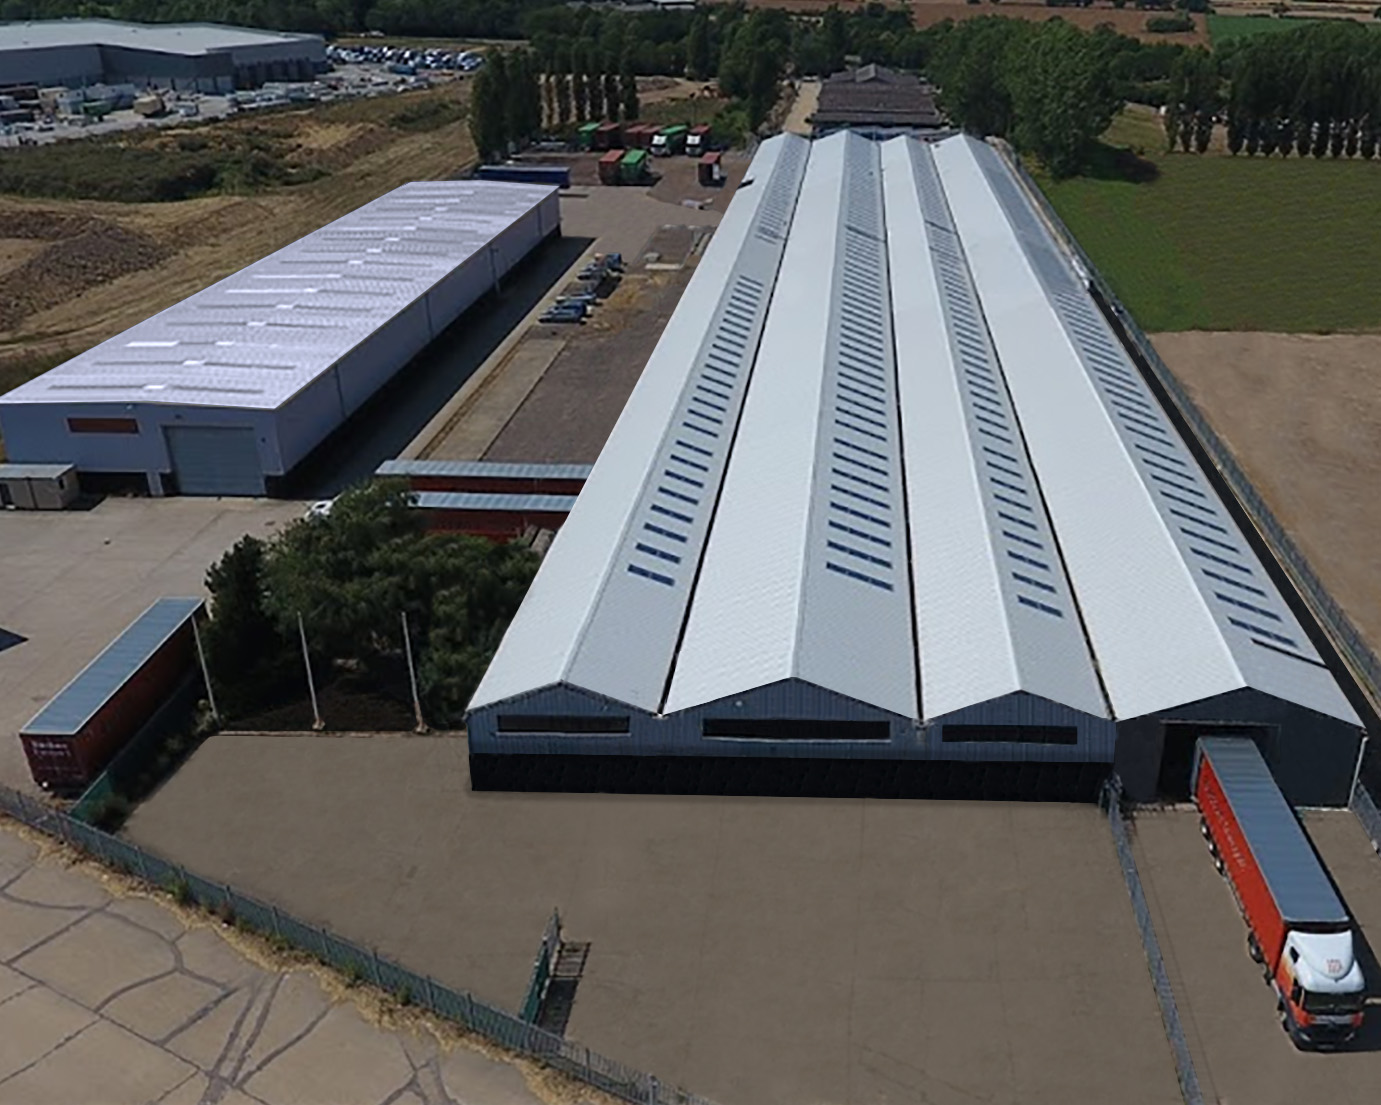 Aegg's UK packaging manufacturing facility